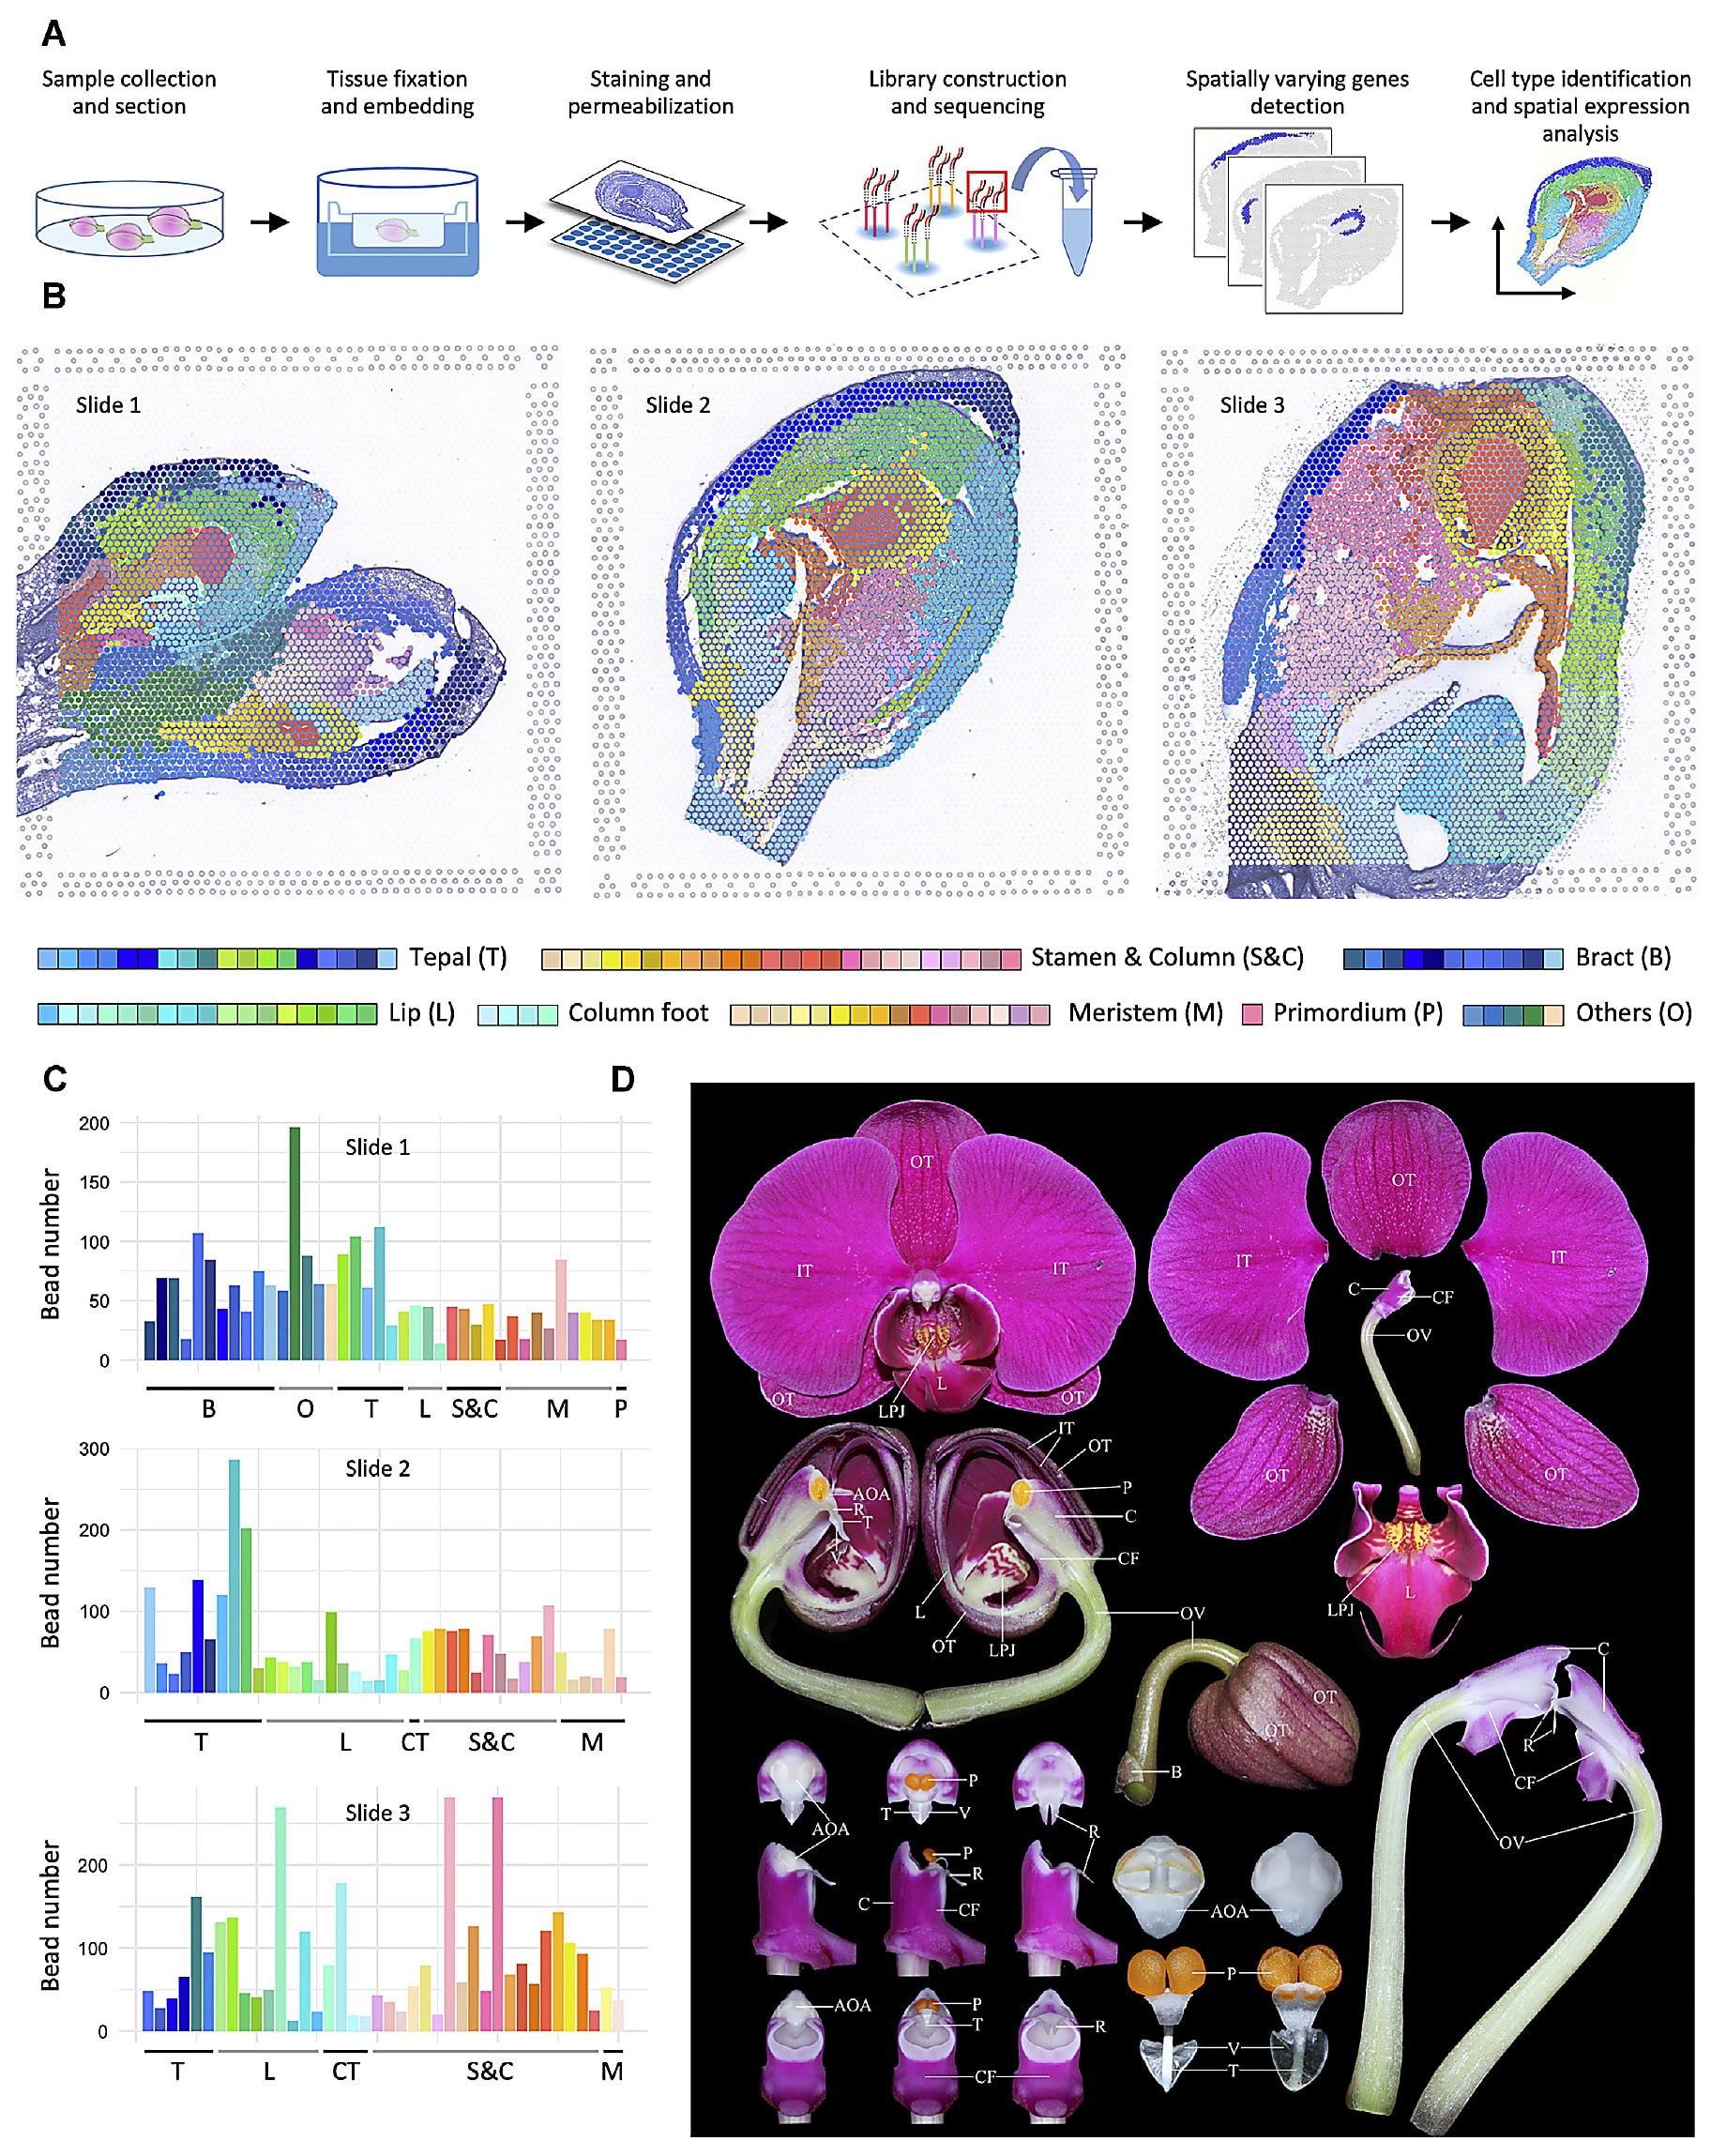 Reconstruction of organogenesis in early developmental stages of orchid flower based on spatial transcriptomics. CREDIT: Liu C, et al. A spatiotemporal atlas of organogenesis in the development of orchid flowers. Nuc Acids Res gkac773 (2022). doi: 10.1093/nar/gkac773. (Creative Commons CC BY).